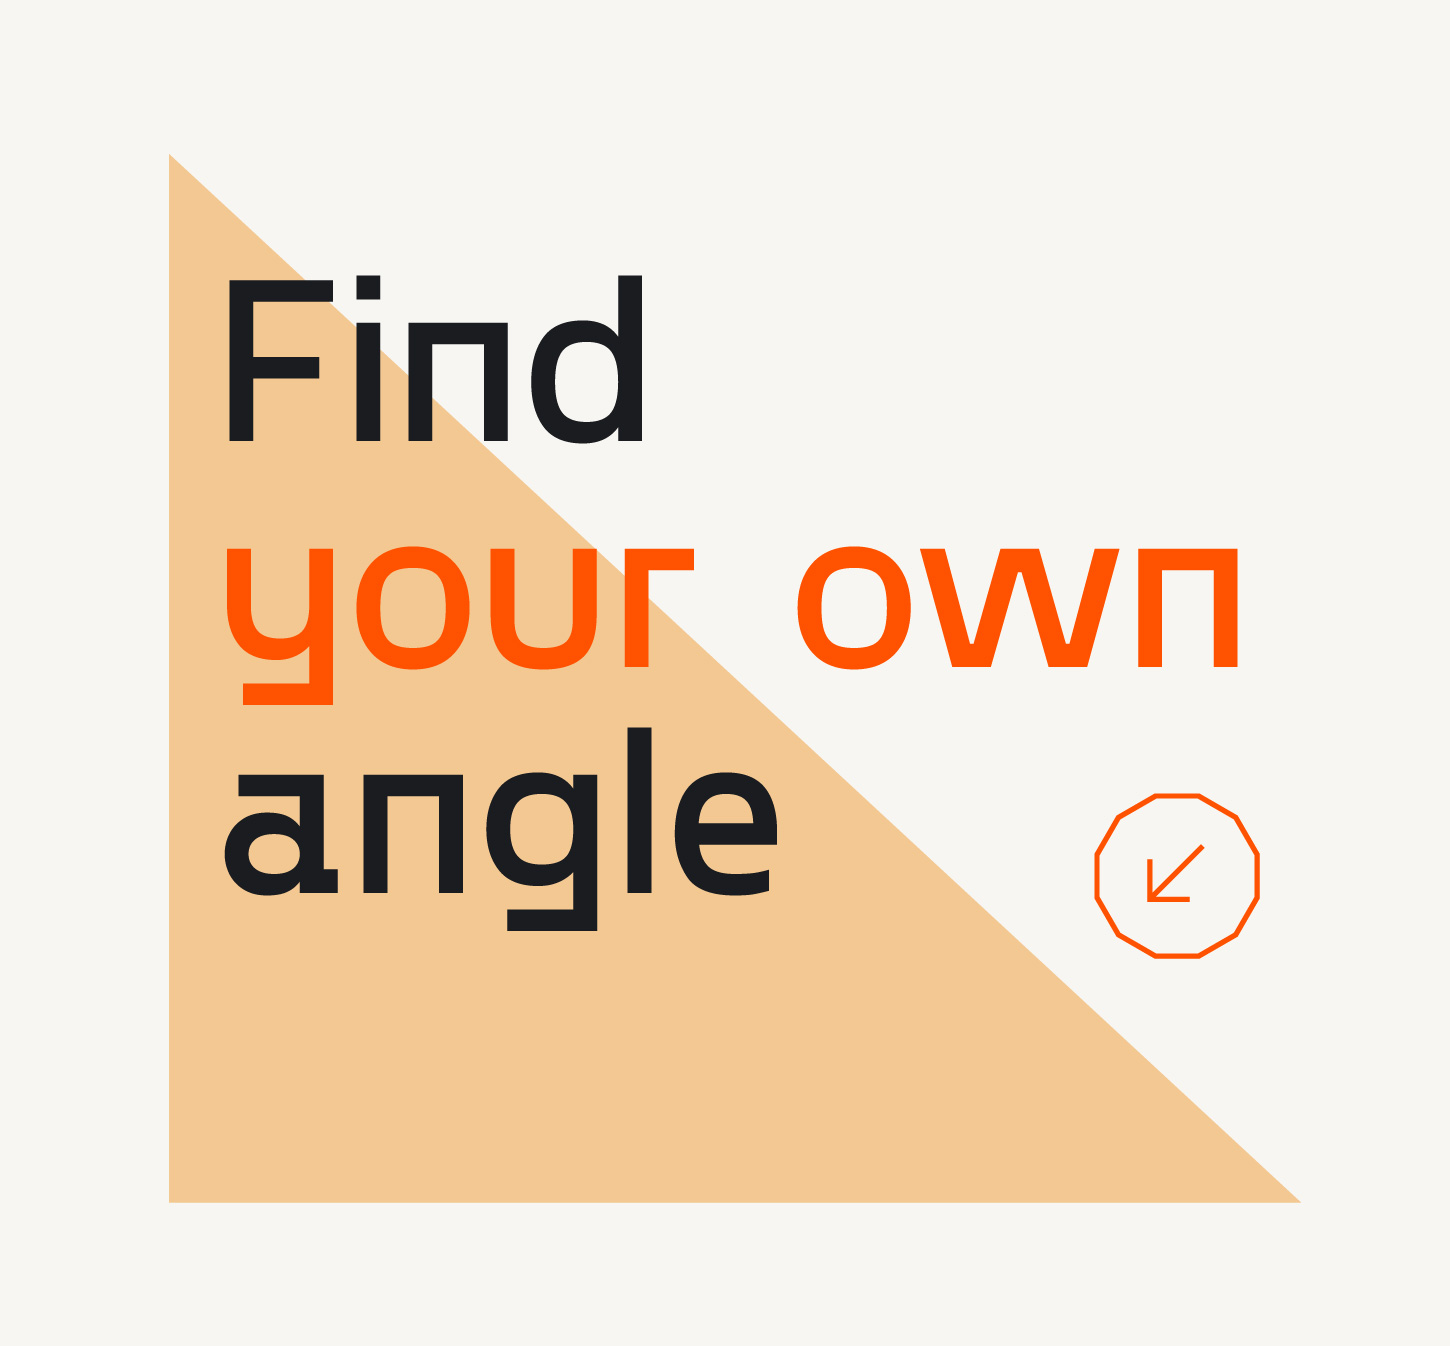 "Find your own angle" text on top of orange and white background.